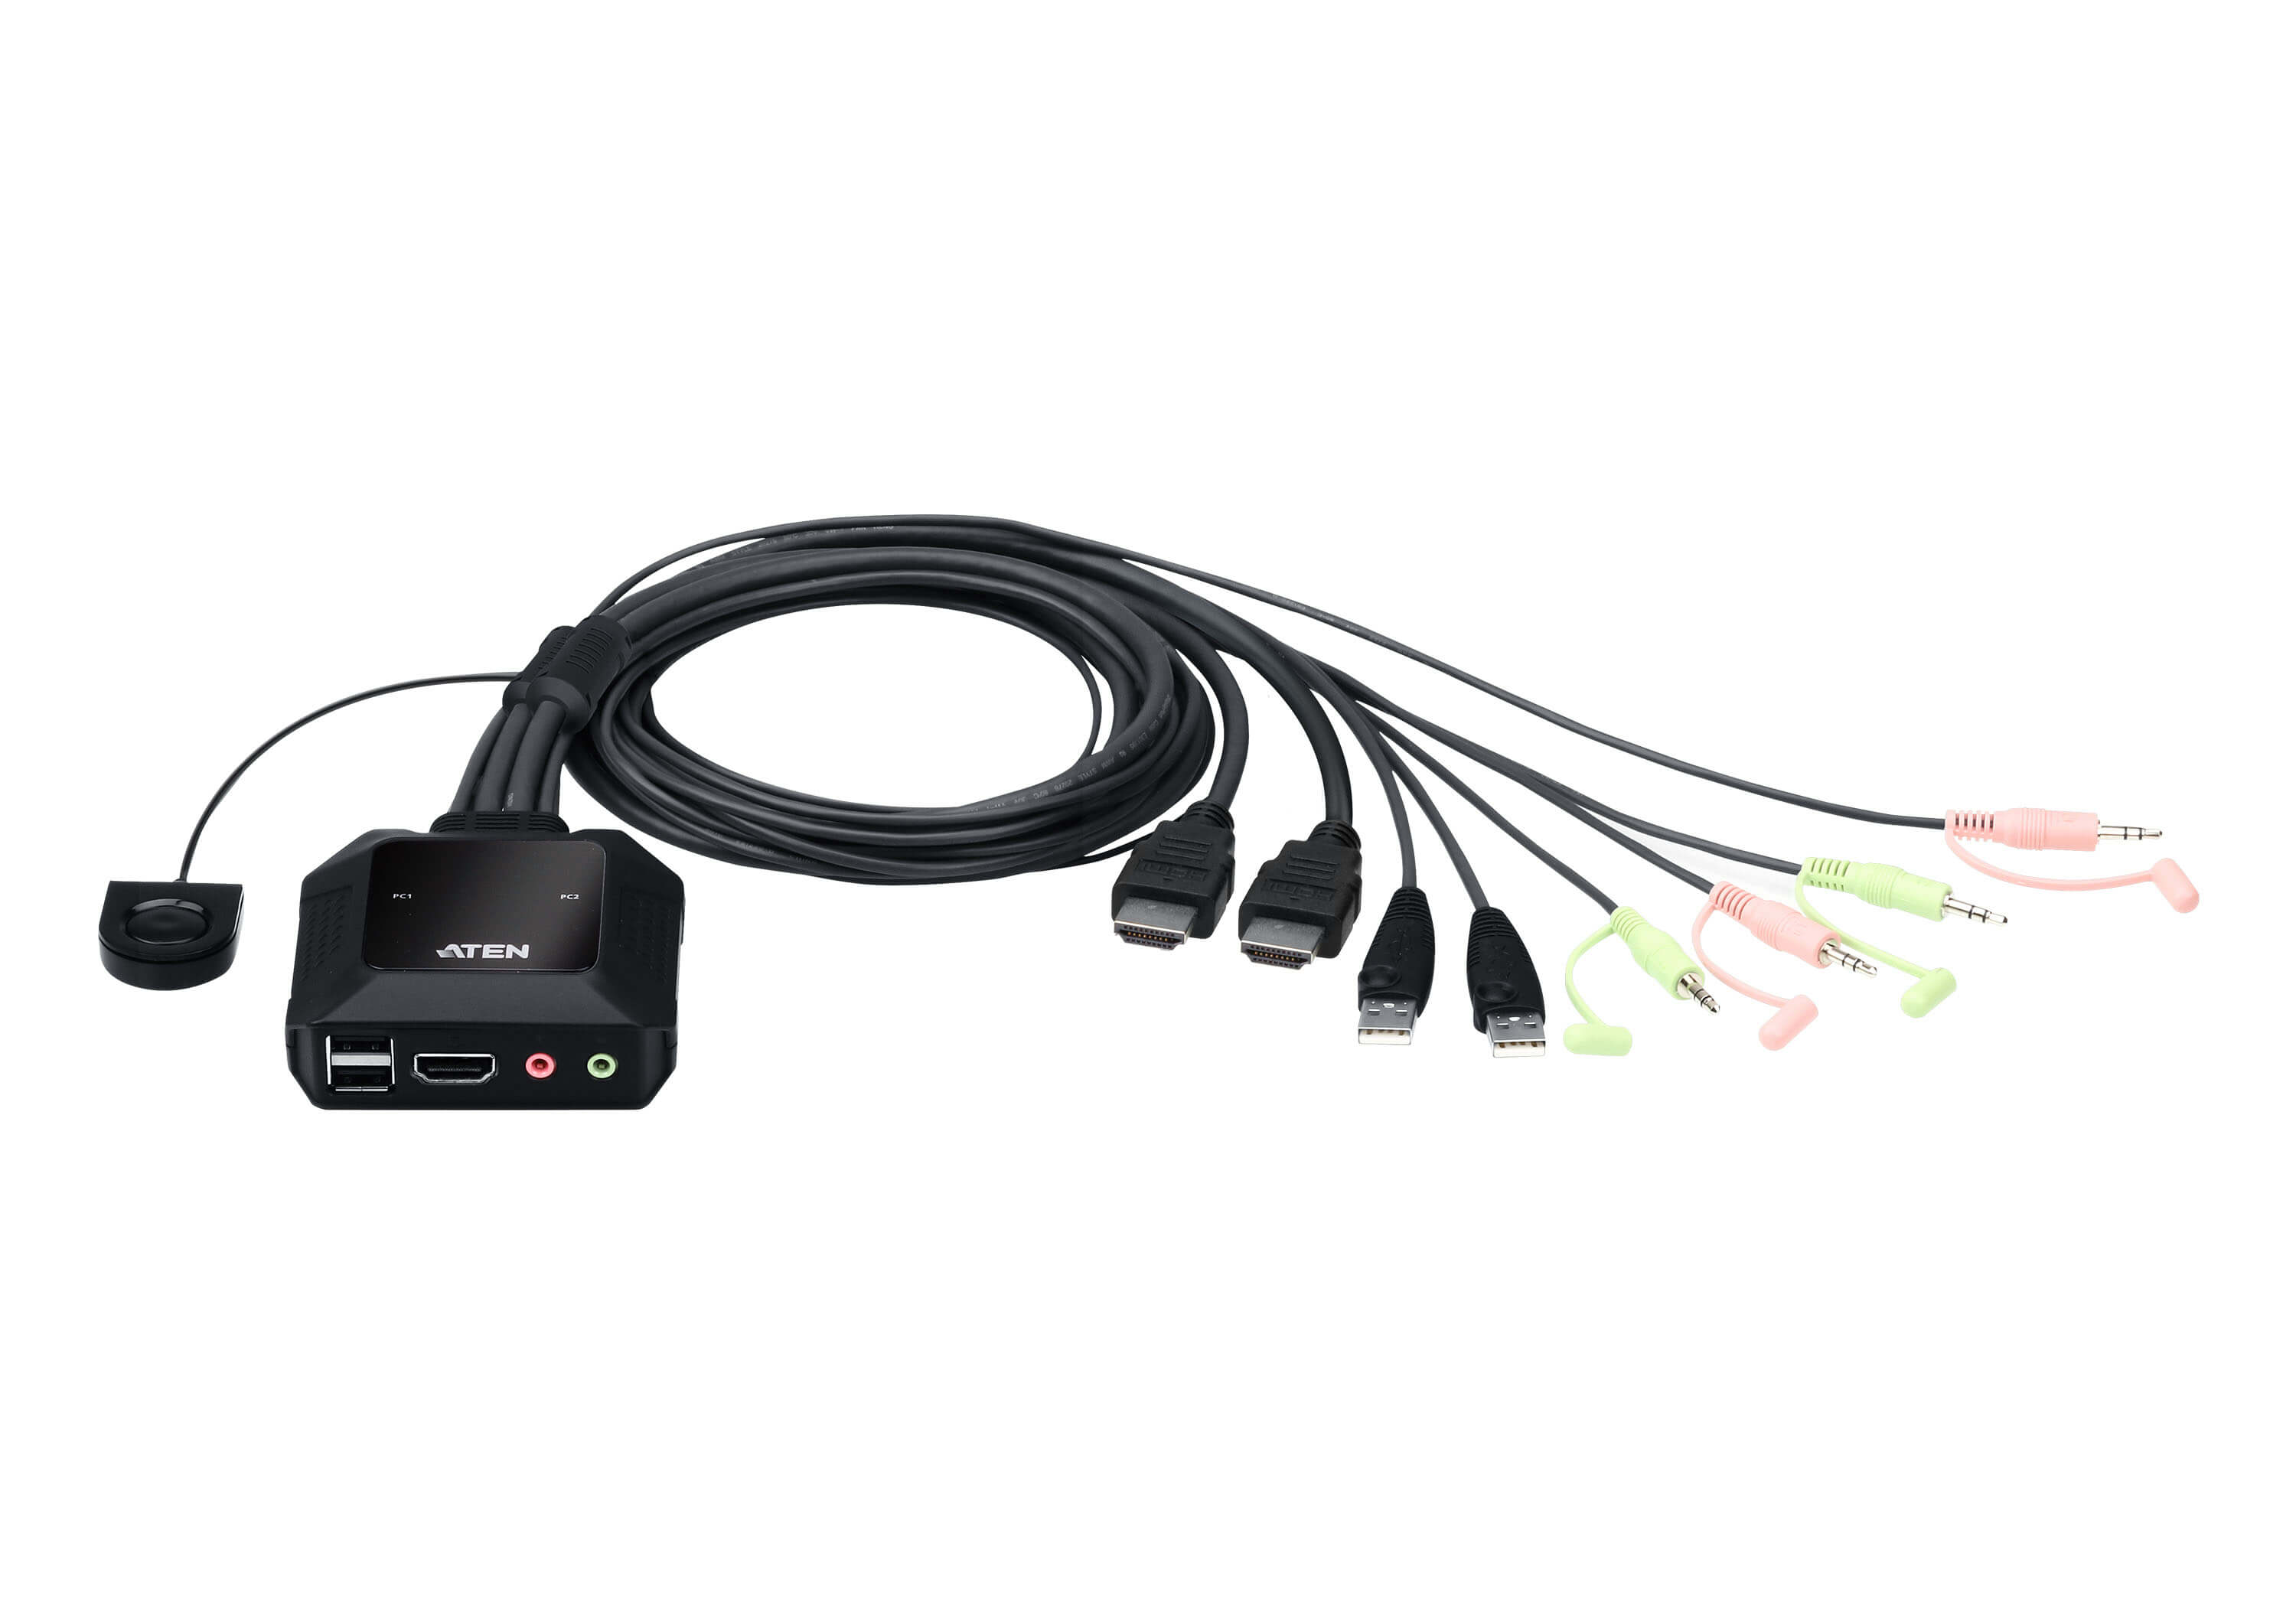 KVM Switches/Aten: Aten, 2, Port, USB, 4K, @60Hz, HDMI, Cable, KVM, Switch, with, Remote, Port, Selector, 